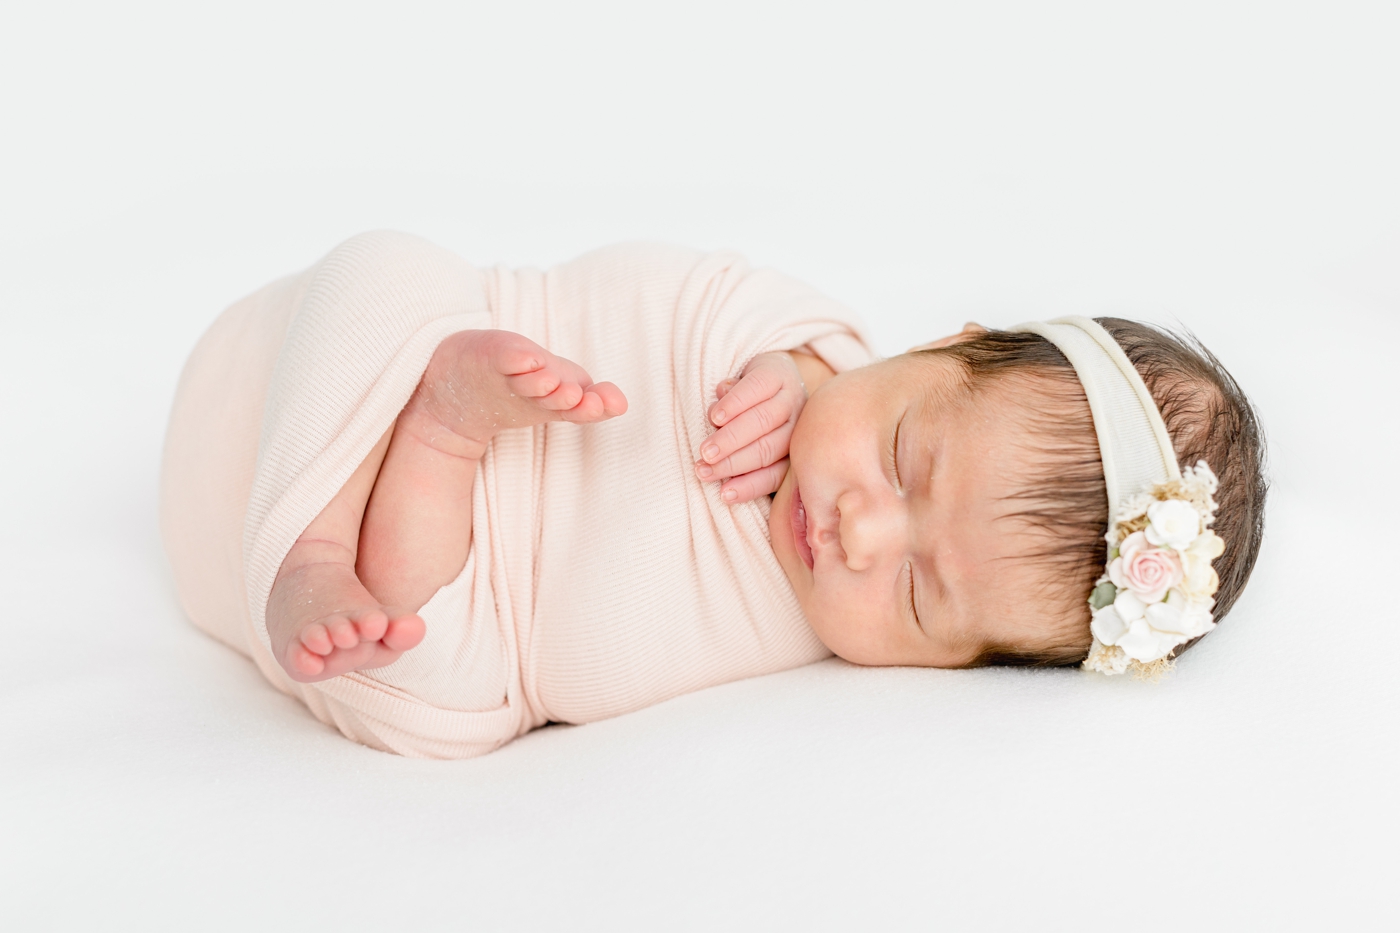 Sleeping baby in pink swaddle during newborn session in Austin, TX studio. Photo by Sana Ahmed Photography.